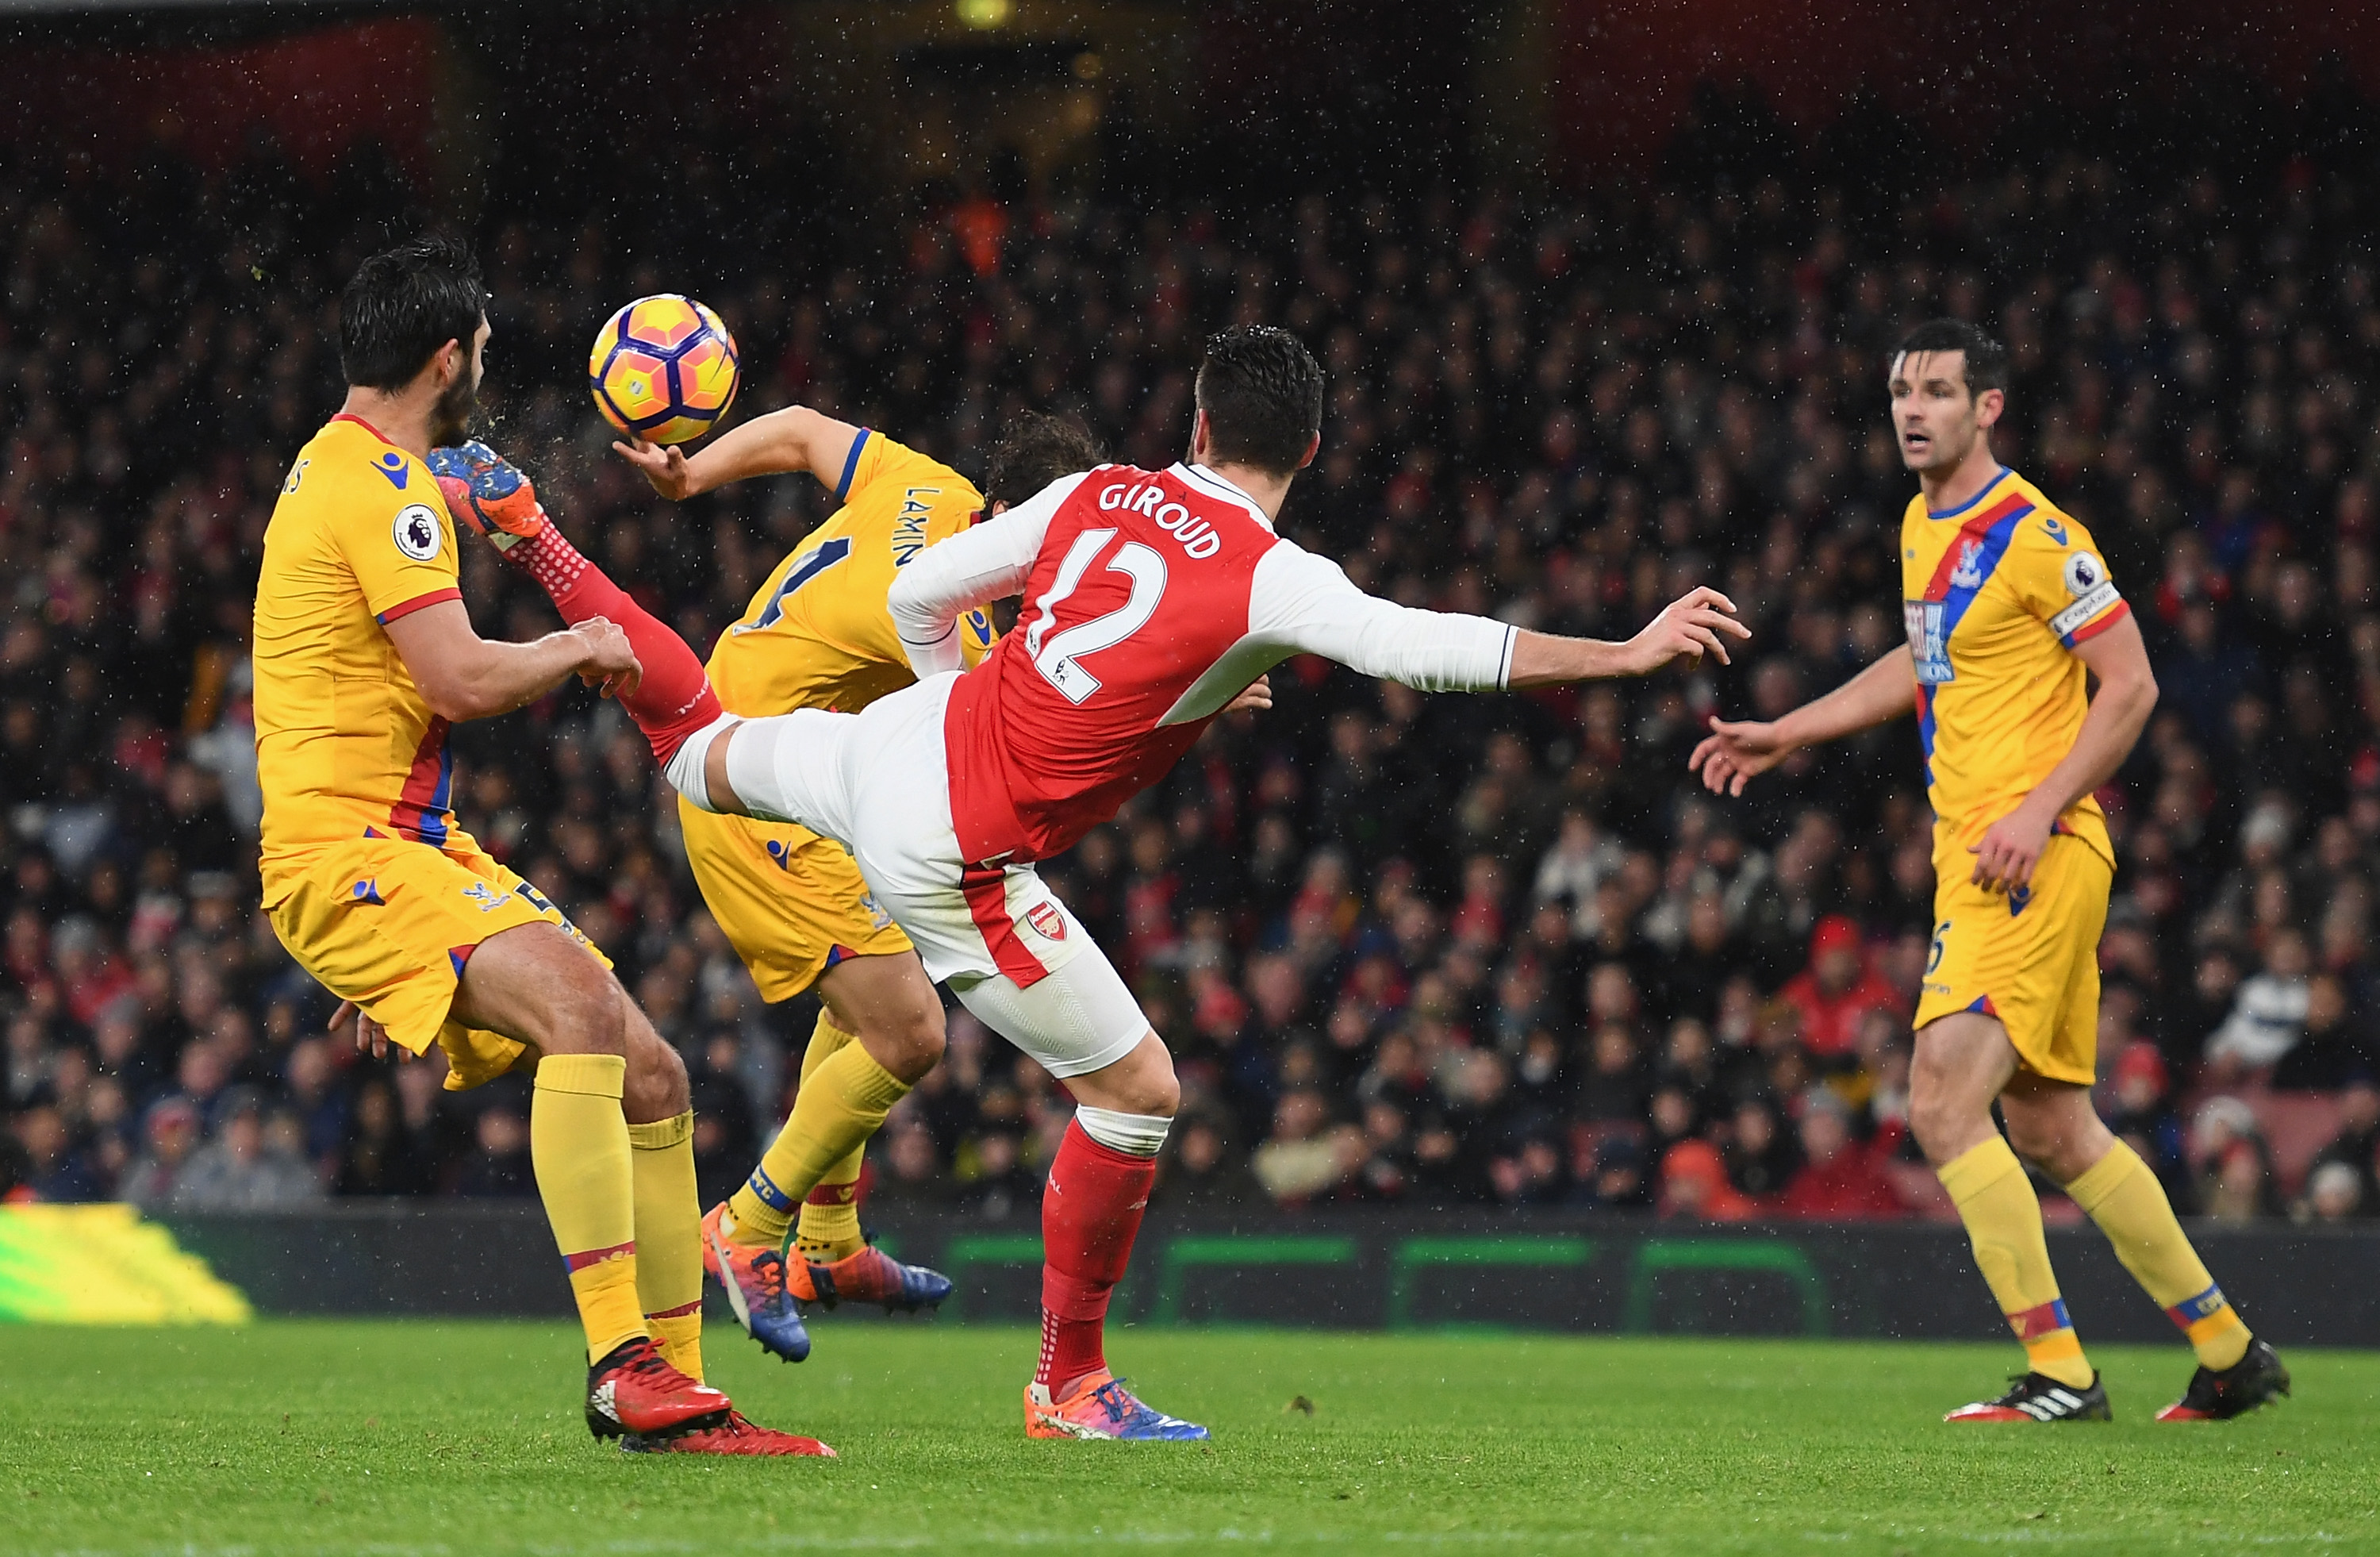 LONDON, ENGLAND - JANUARY 01:  Olivier Giroud of Arsenal scores the opening goal during the Premier League match between Arsenal and Crystal Palace at Emirates Stadium on January 1, 2017 in London, England.  (Photo by Shaun Botterill/Getty Images)